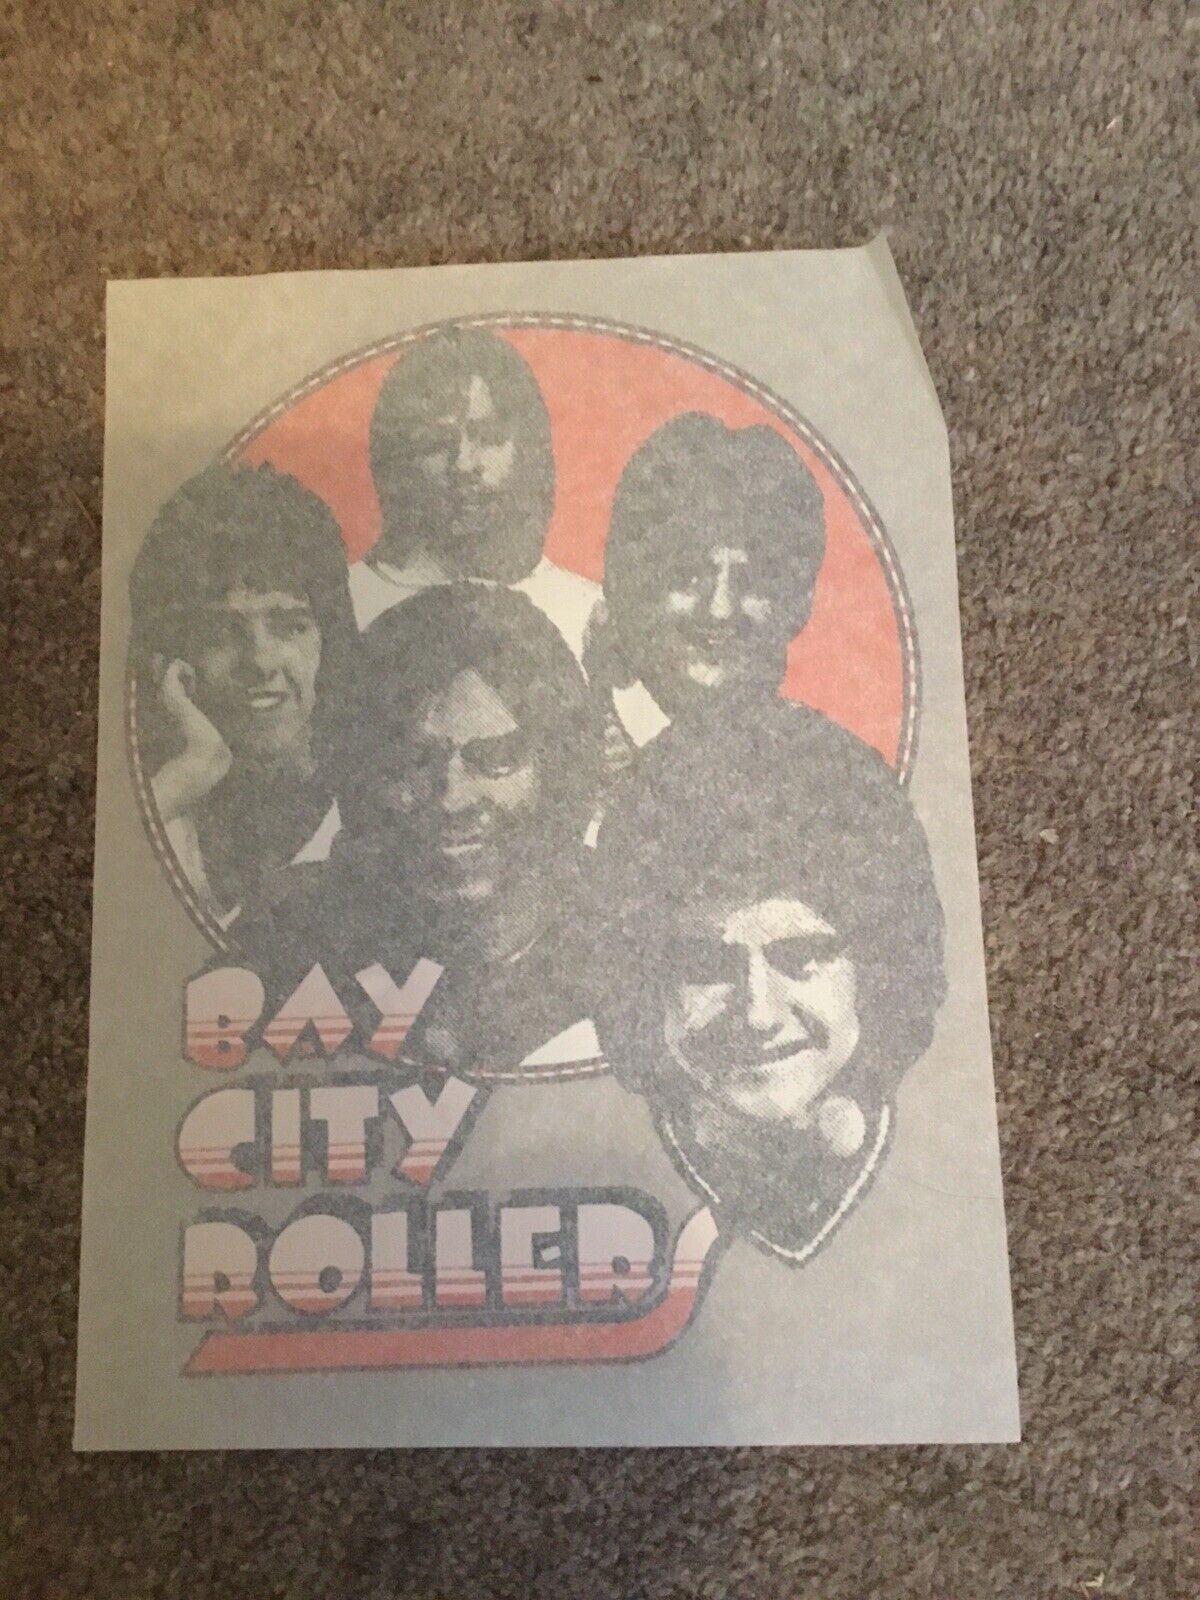 Bay City Rollers Transfer Sales Store Shirt Tee